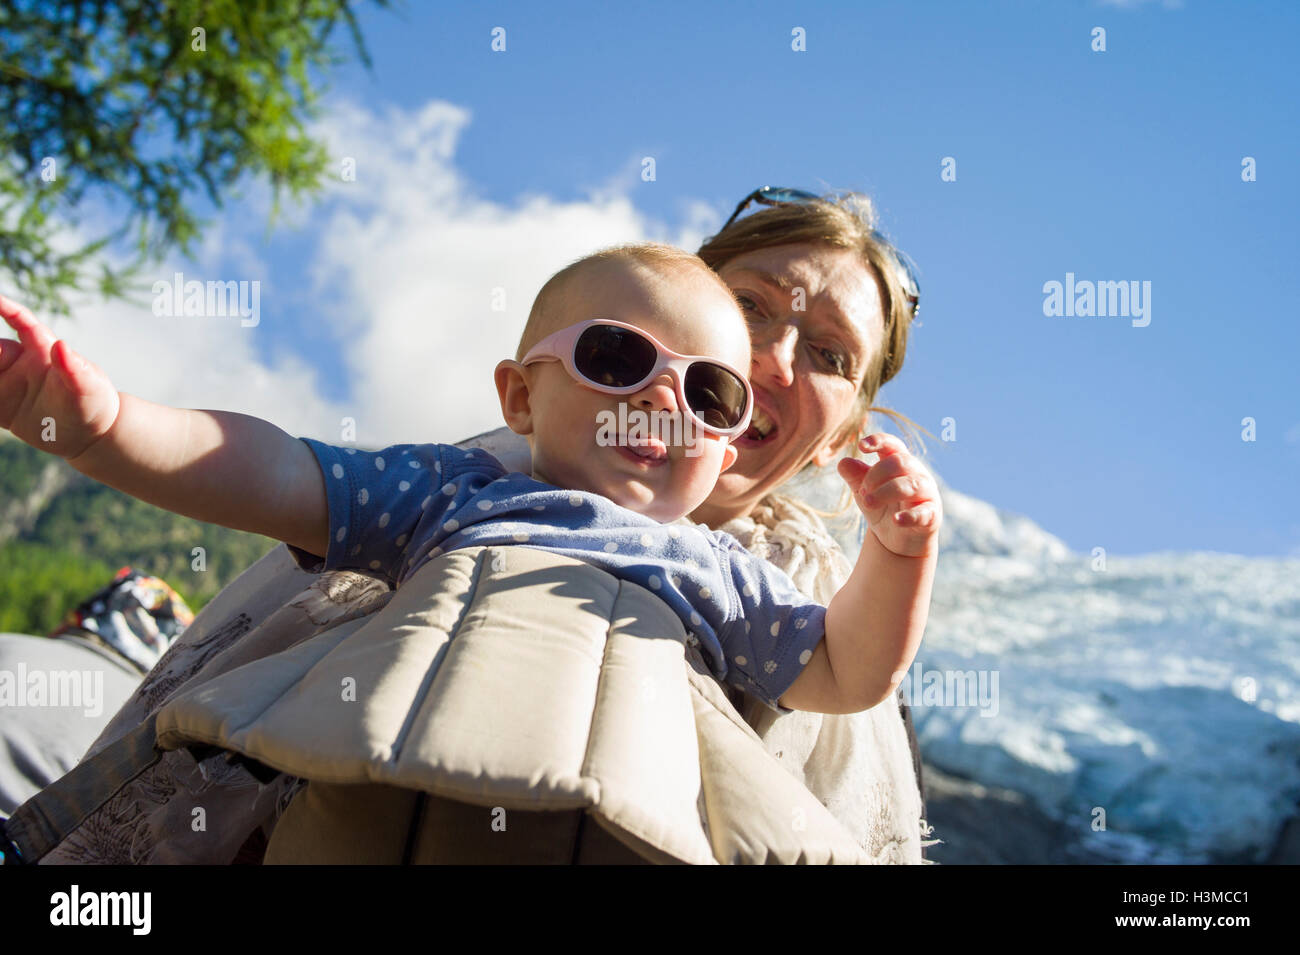 Low angle view of baby girl in sling sticking tongue out at camera Stock Photo